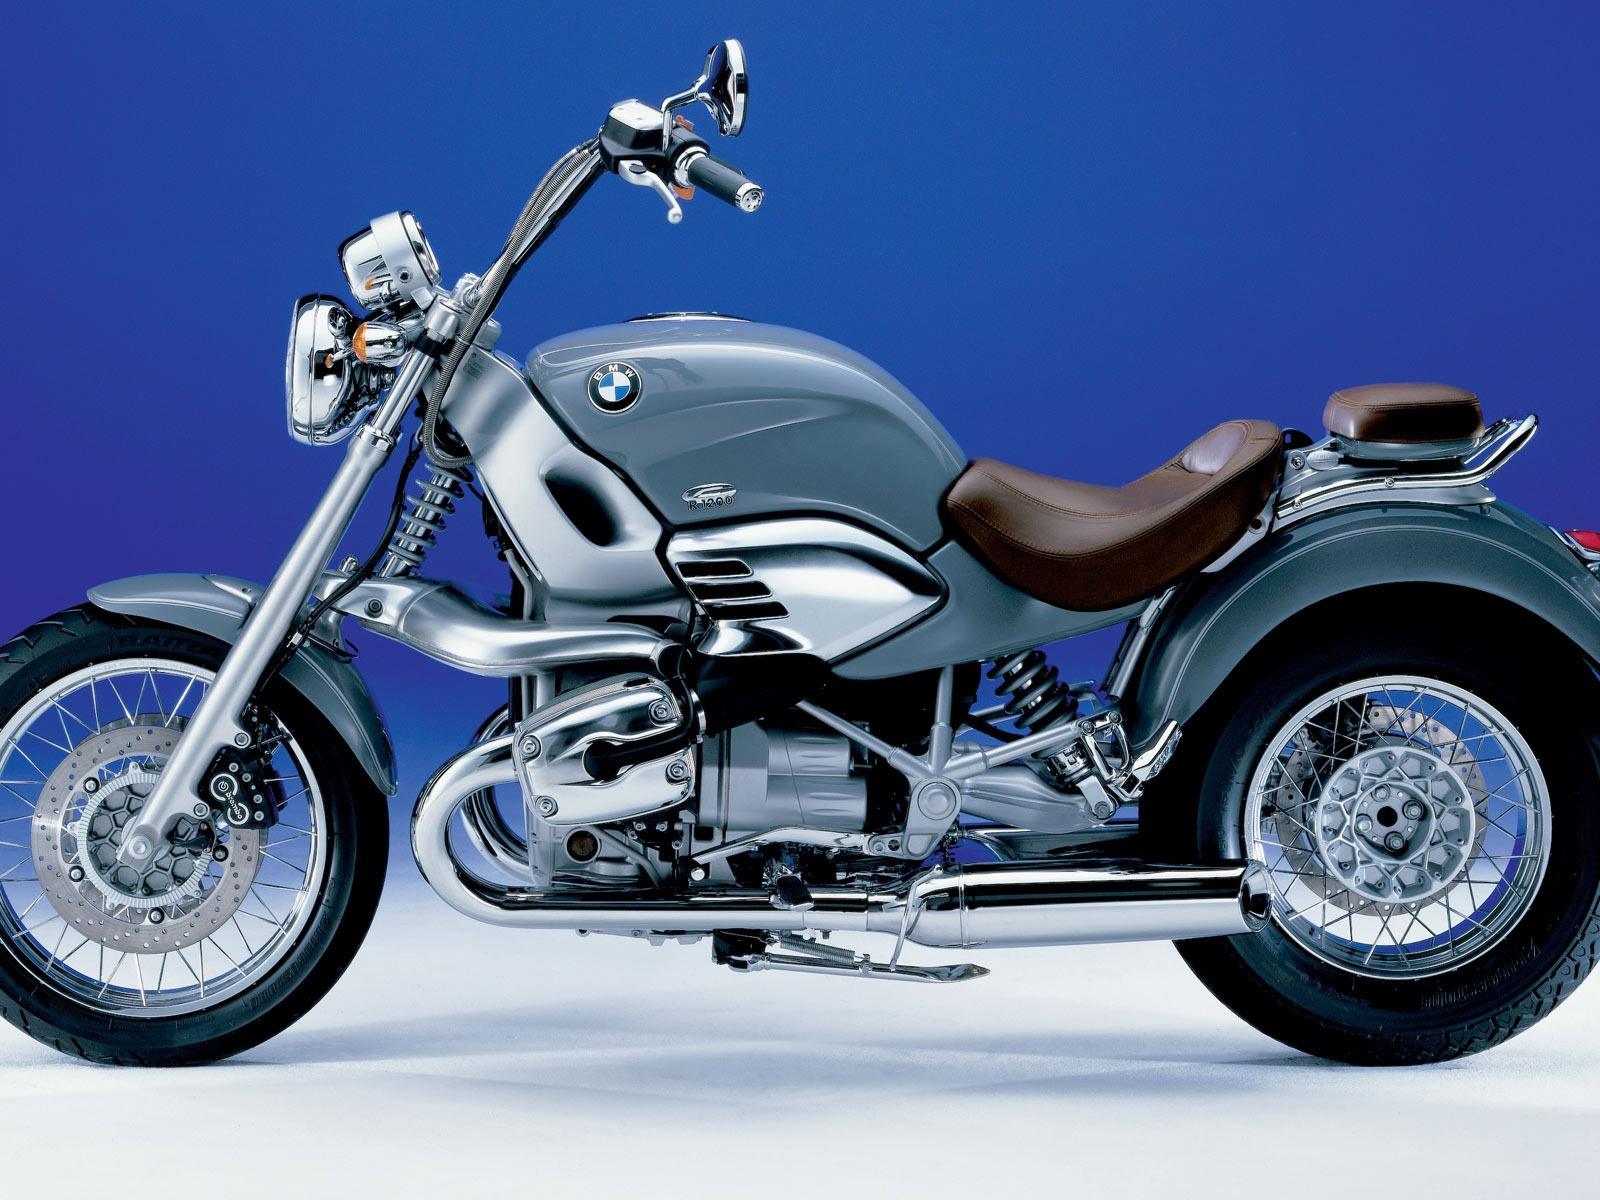 BMW motorcycle wallpapers (4) #17 - 1600x1200